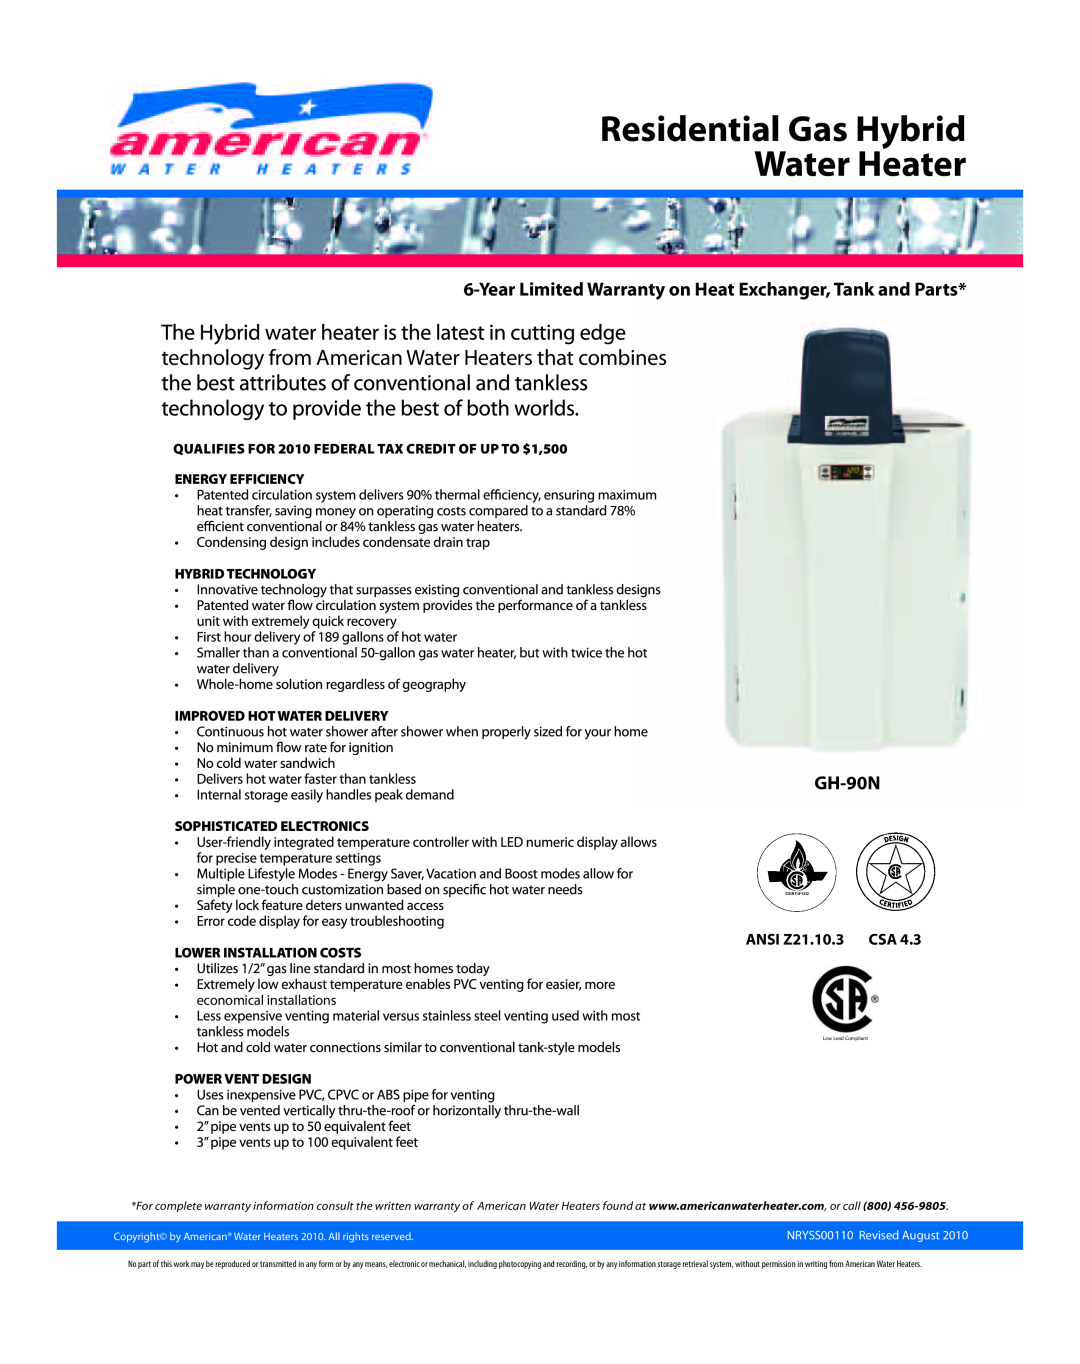 American Water Heater NRYSS0110 warranty ANSI Z21.10.3 CSA, economical installations, Residential Gas Hybrid Water Heater 